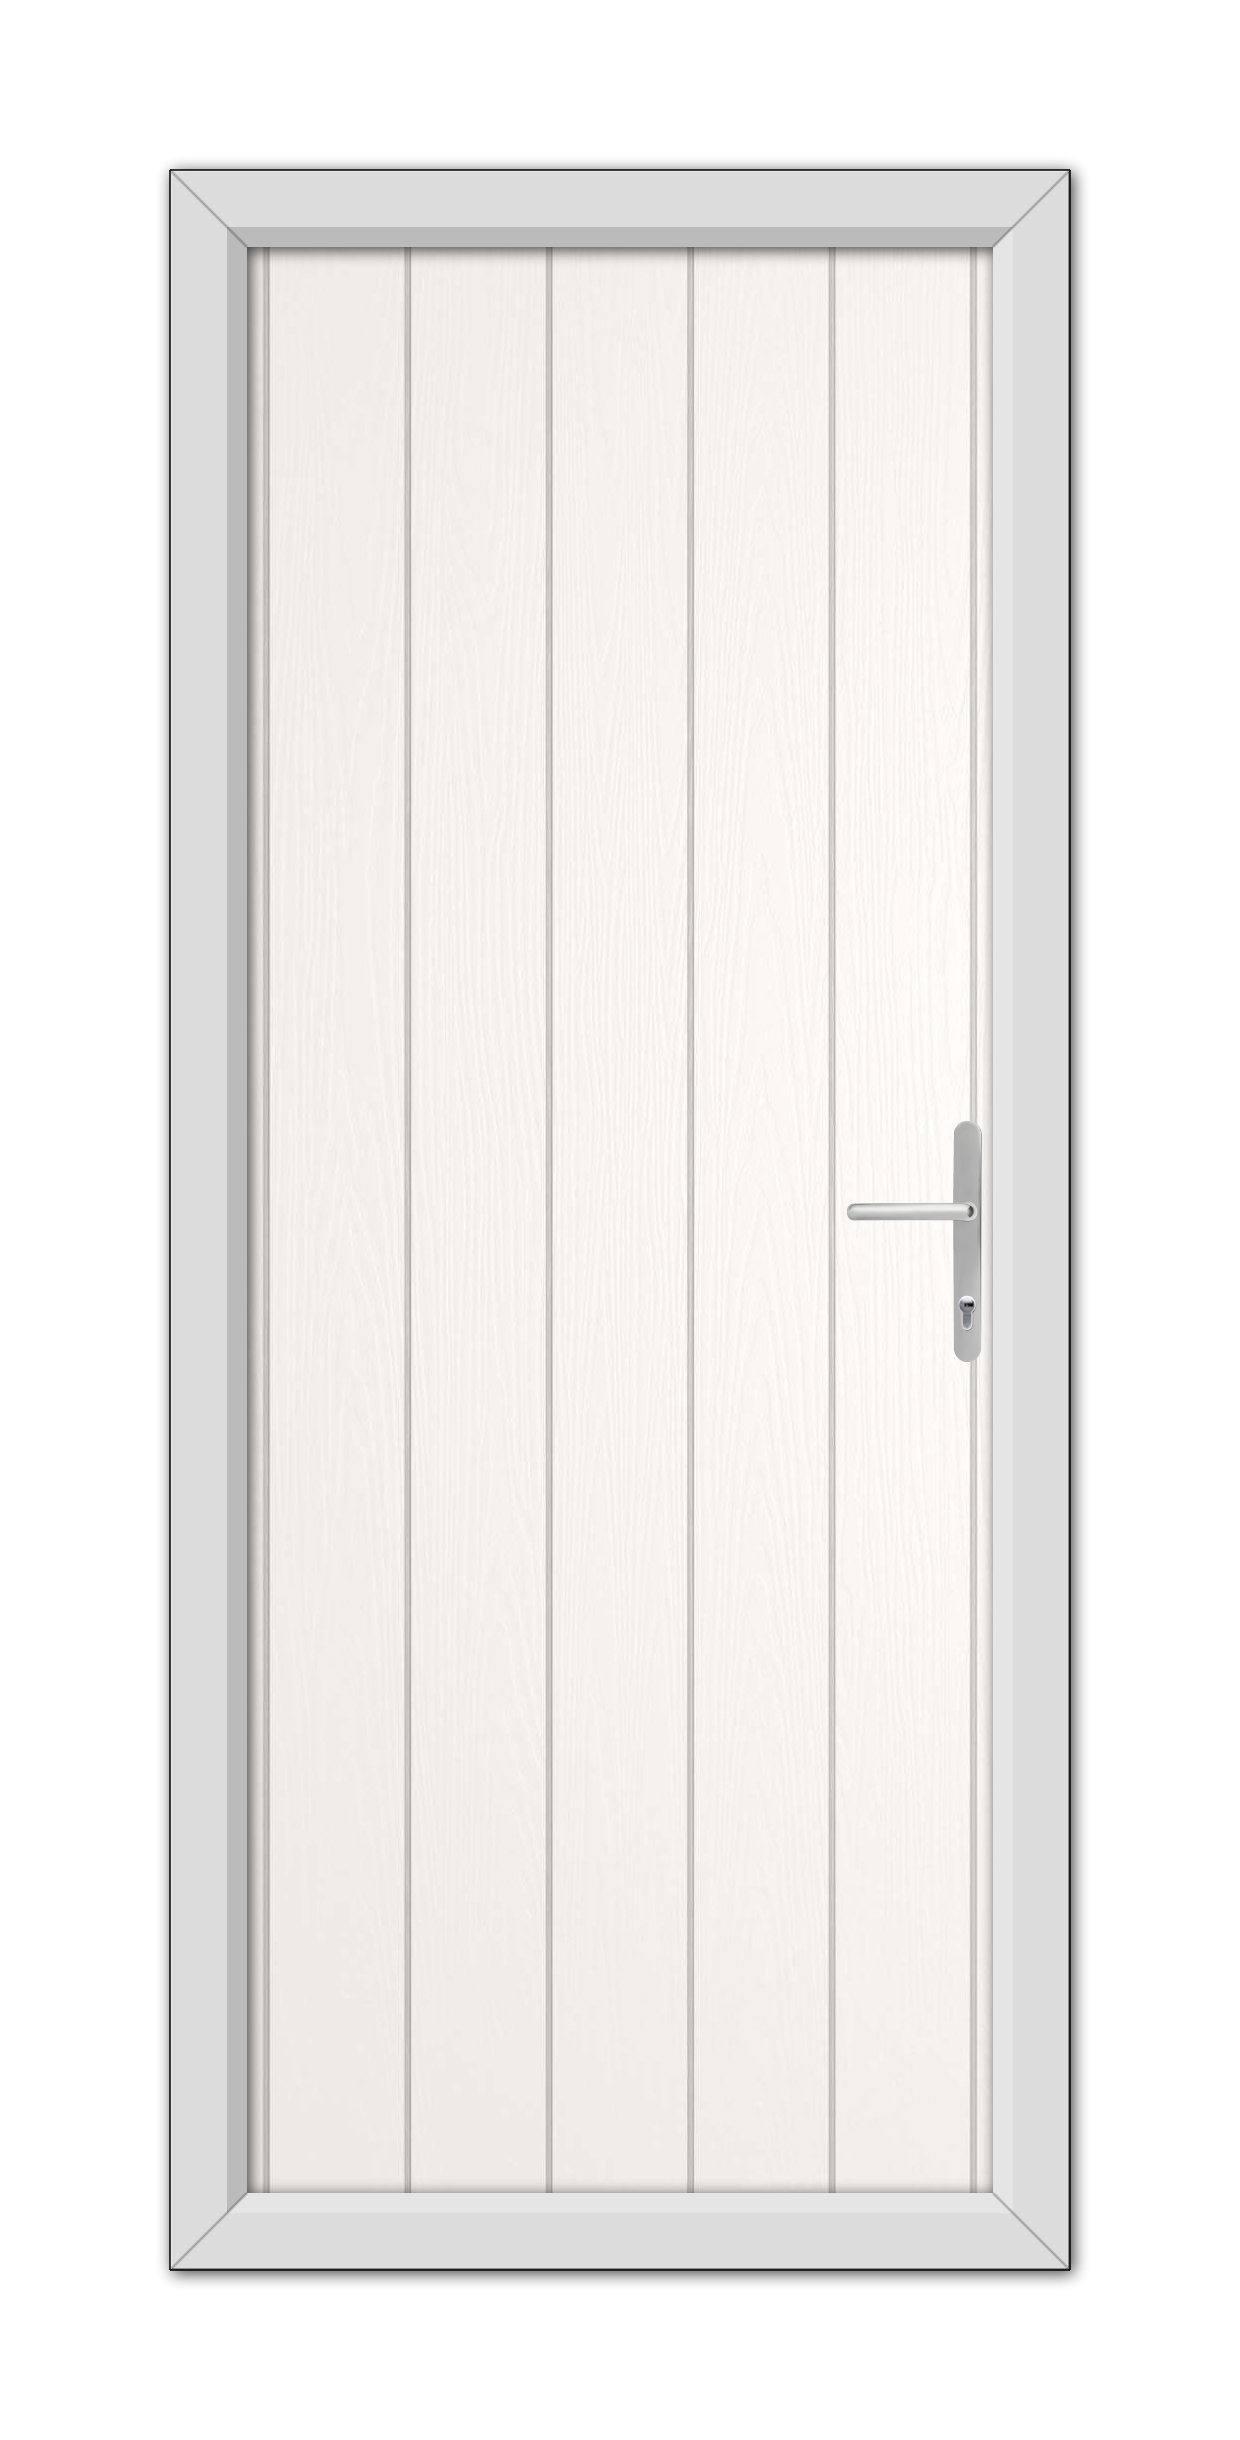 A White Norfolk Solid Composite Door 48mm Timber Core with a metallic handle, set within a gray frame, viewed head-on.